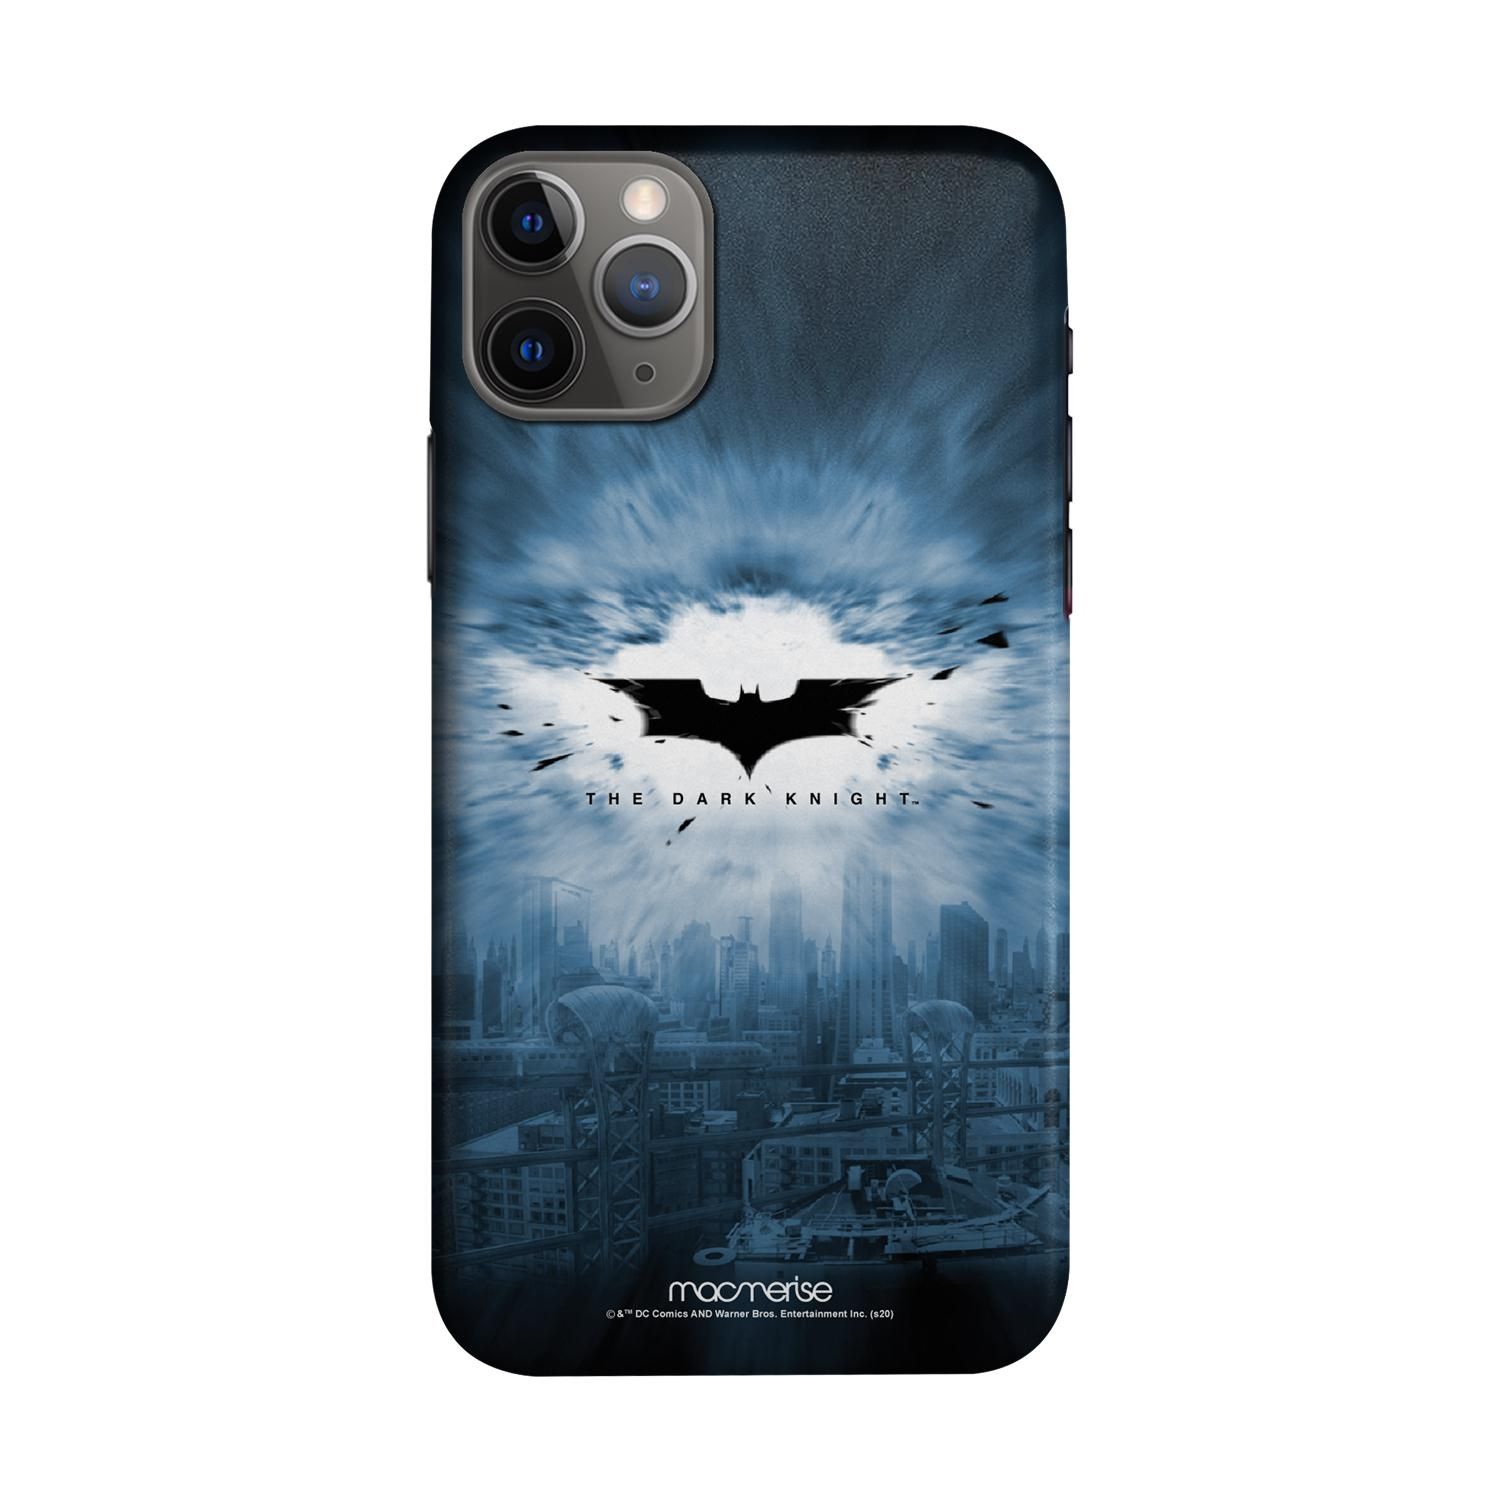 Buy The Dark Knight - Sleek Phone Case for iPhone 11 Pro Max Online